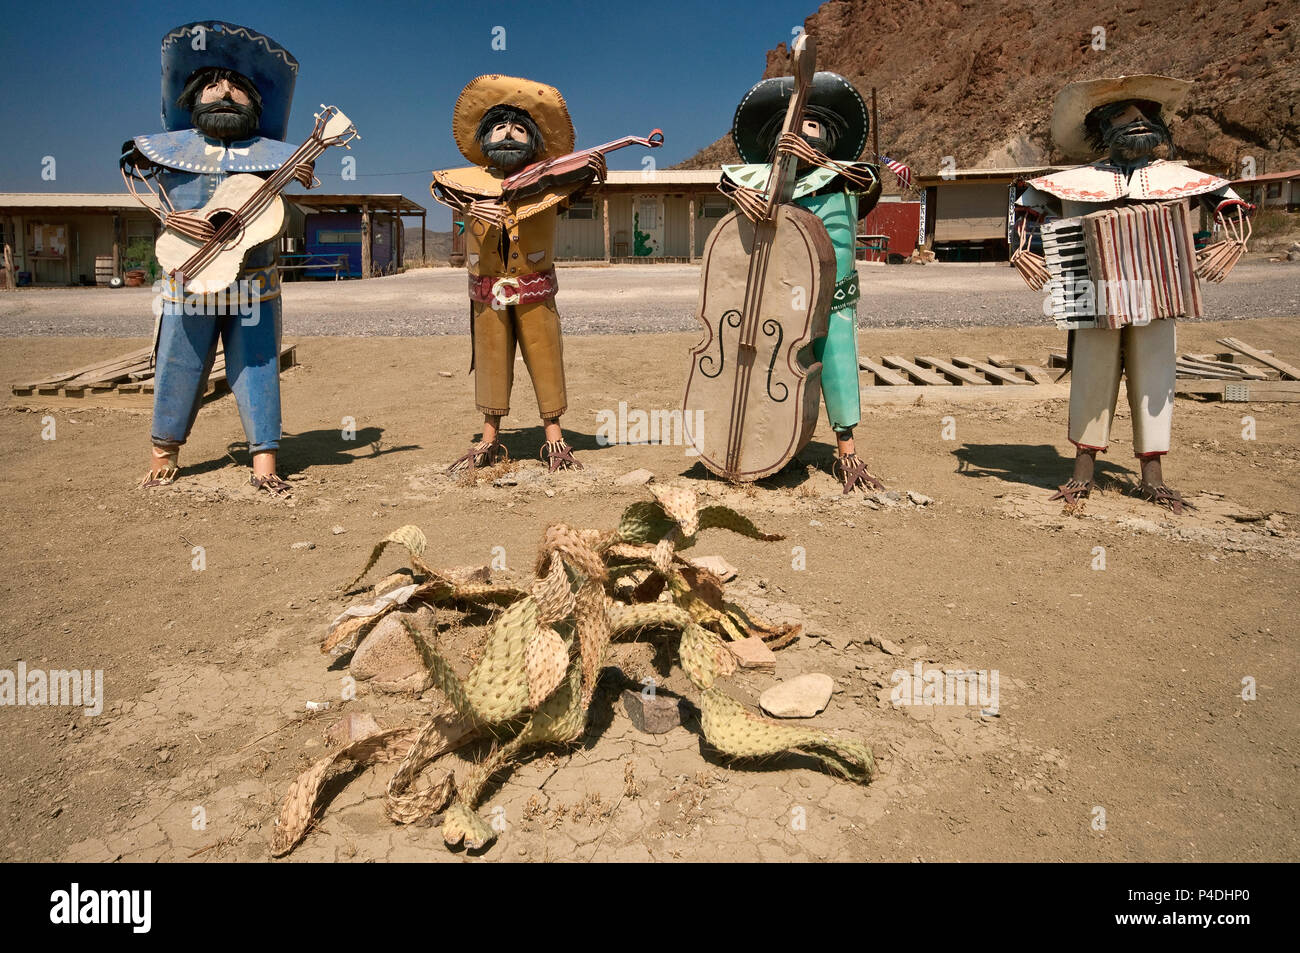 Metal figures of mariachi musicians serenading over dead cactus in Chihuahuan Desert at high noon, Study Butte near Big Bend National Park, Texas, USA Stock Photo